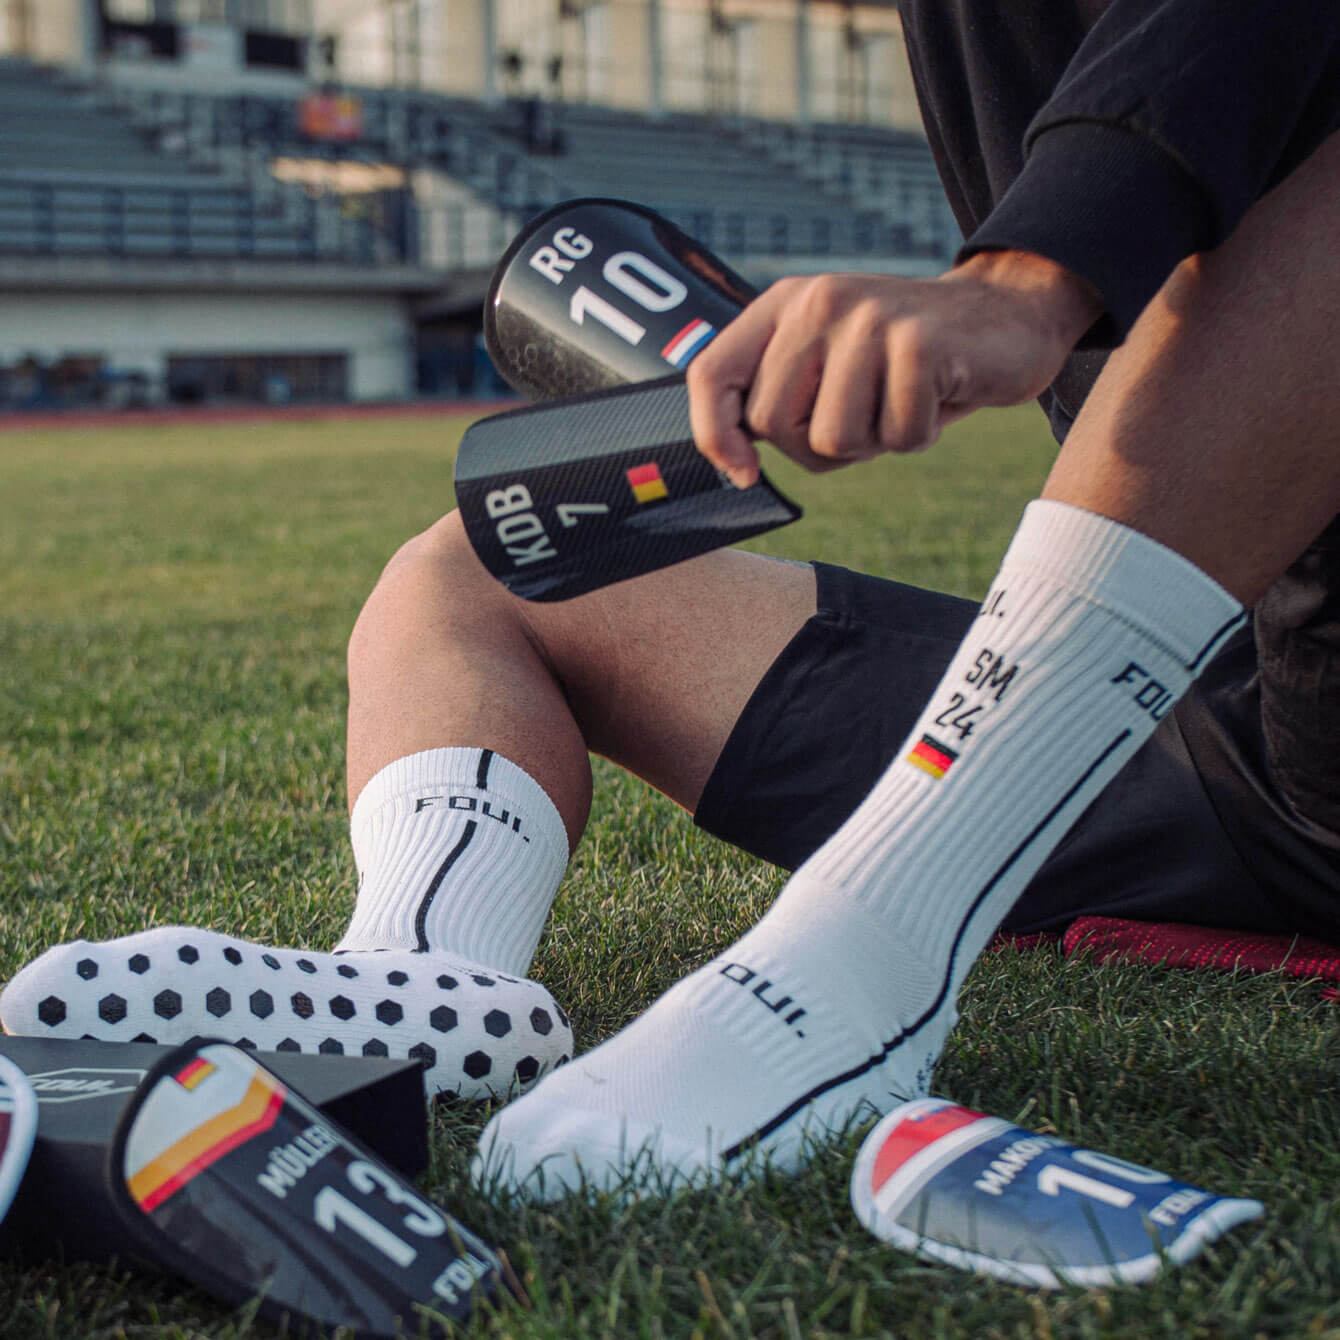 FOUL - Flexible custom shin guards and many products for football